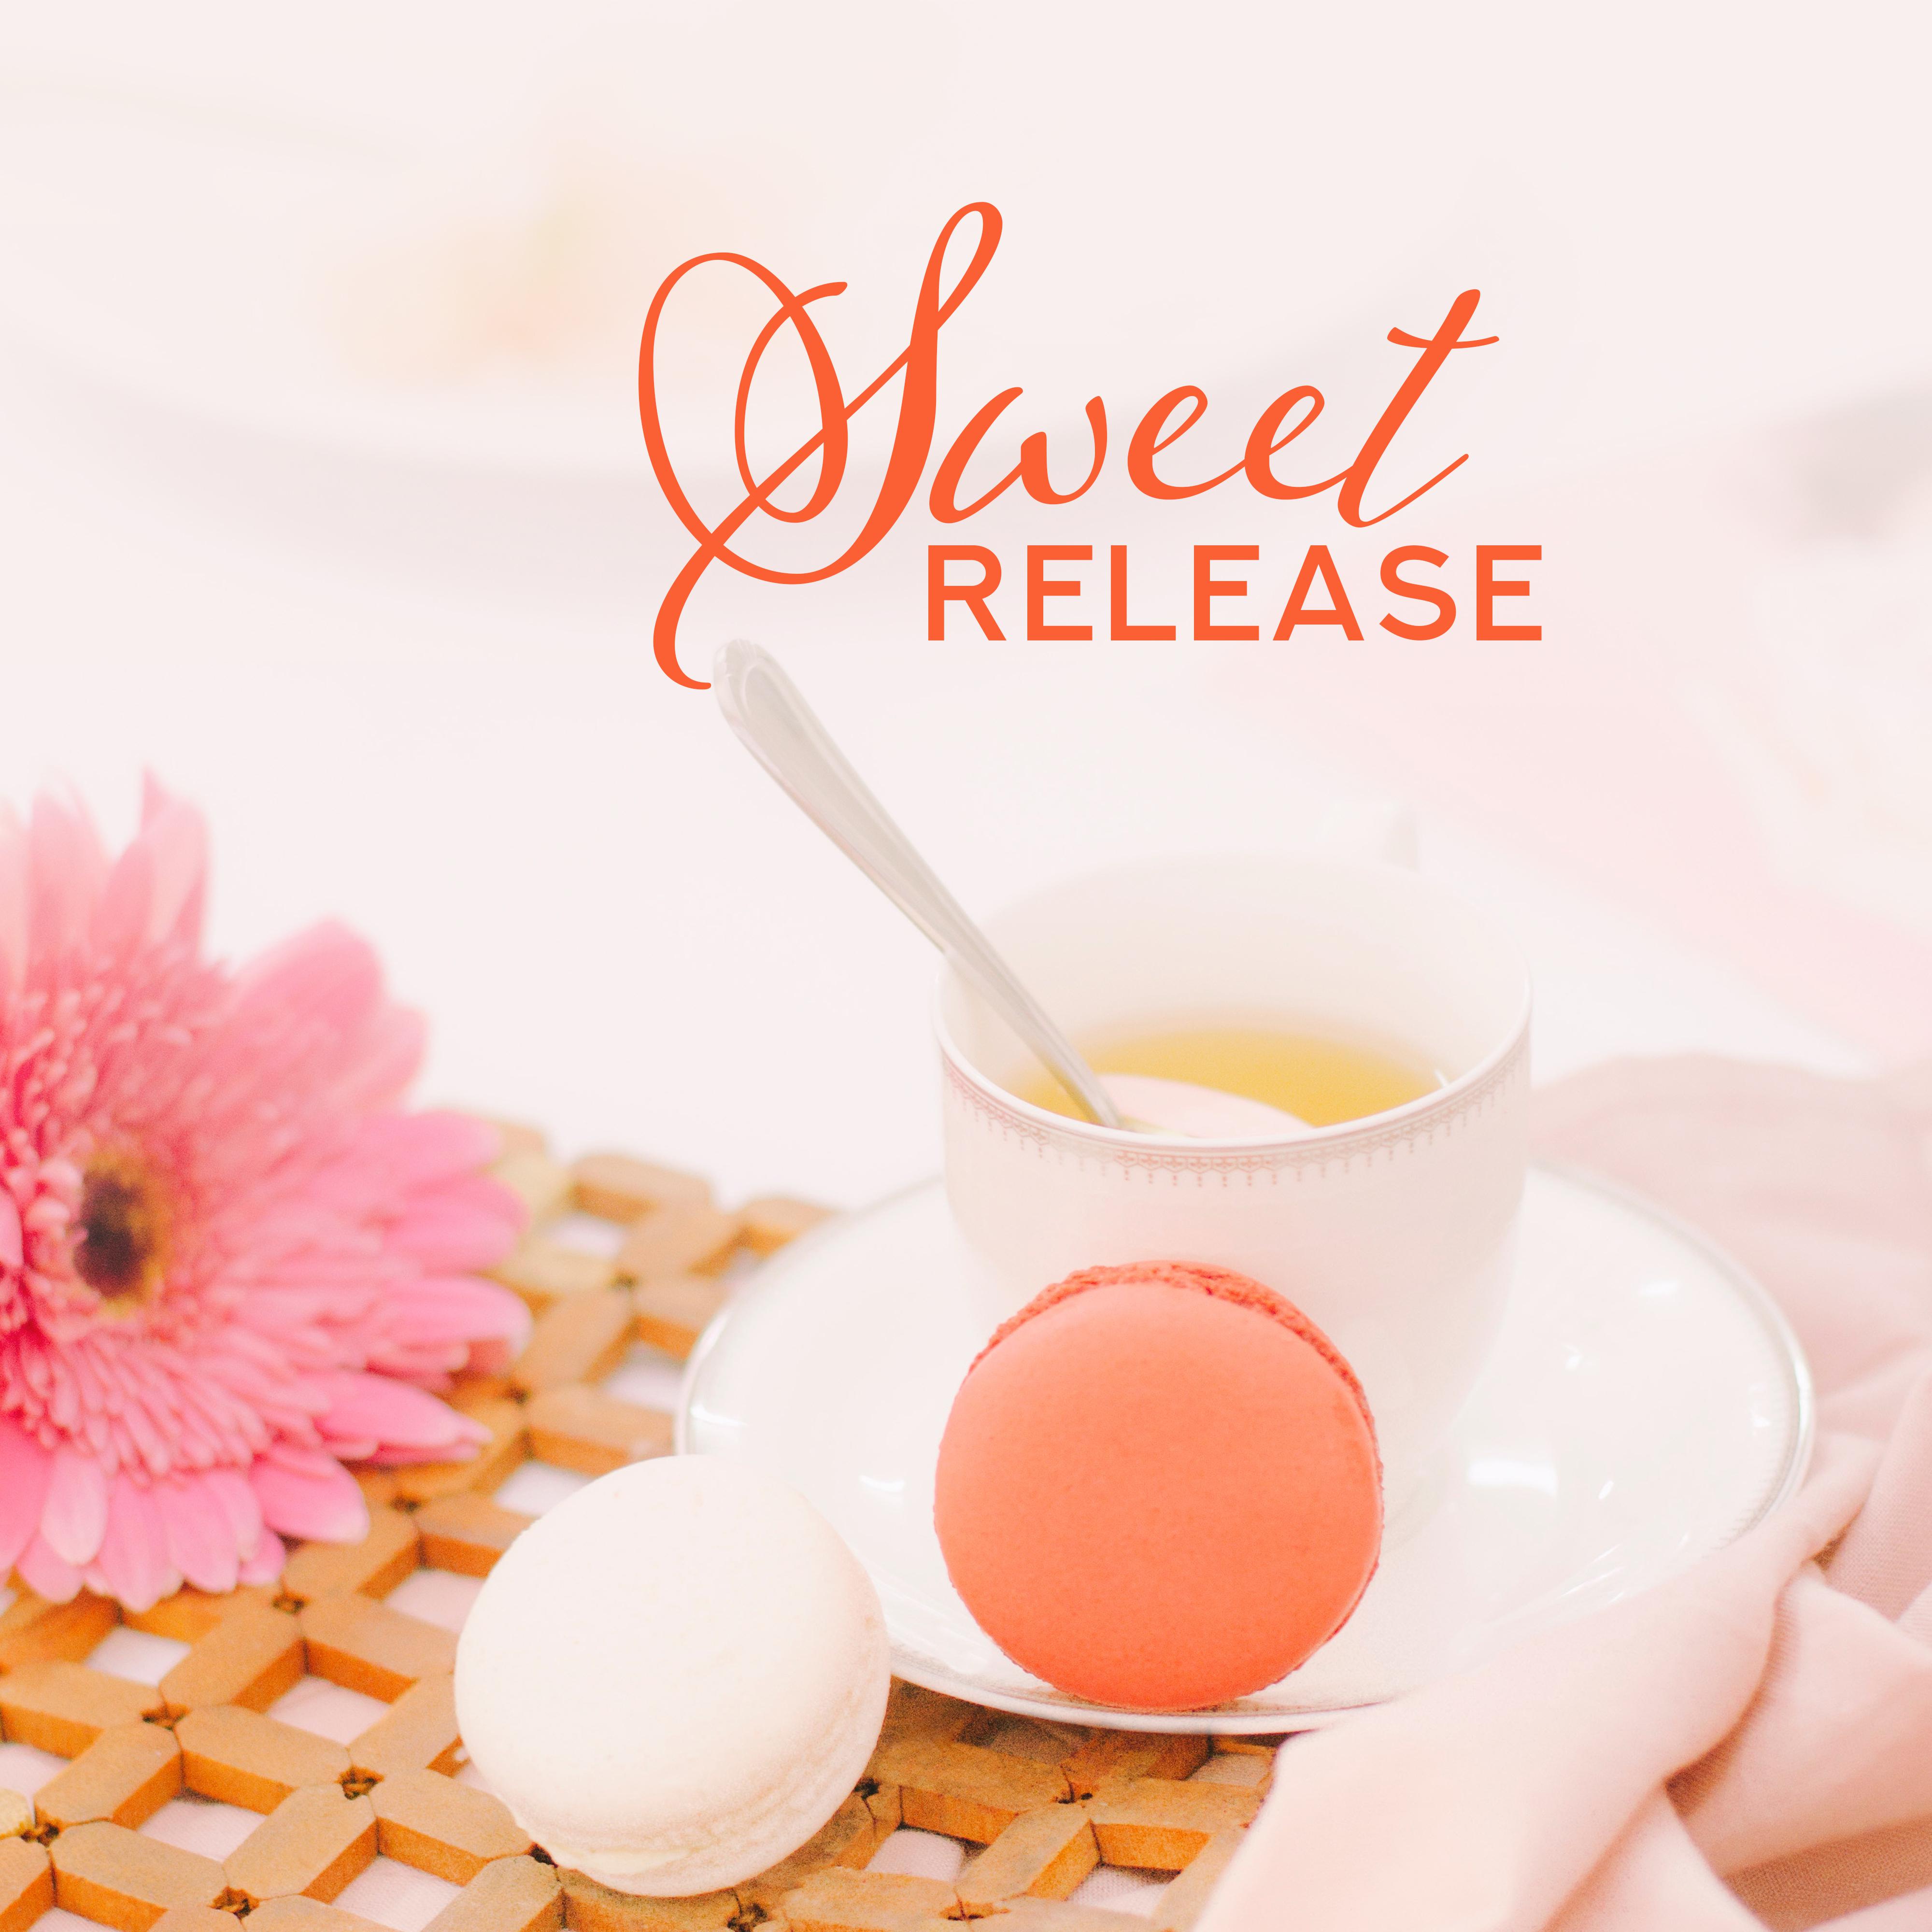 Sweet Release: Chillout Essential to Calm Down, Rest and Relax